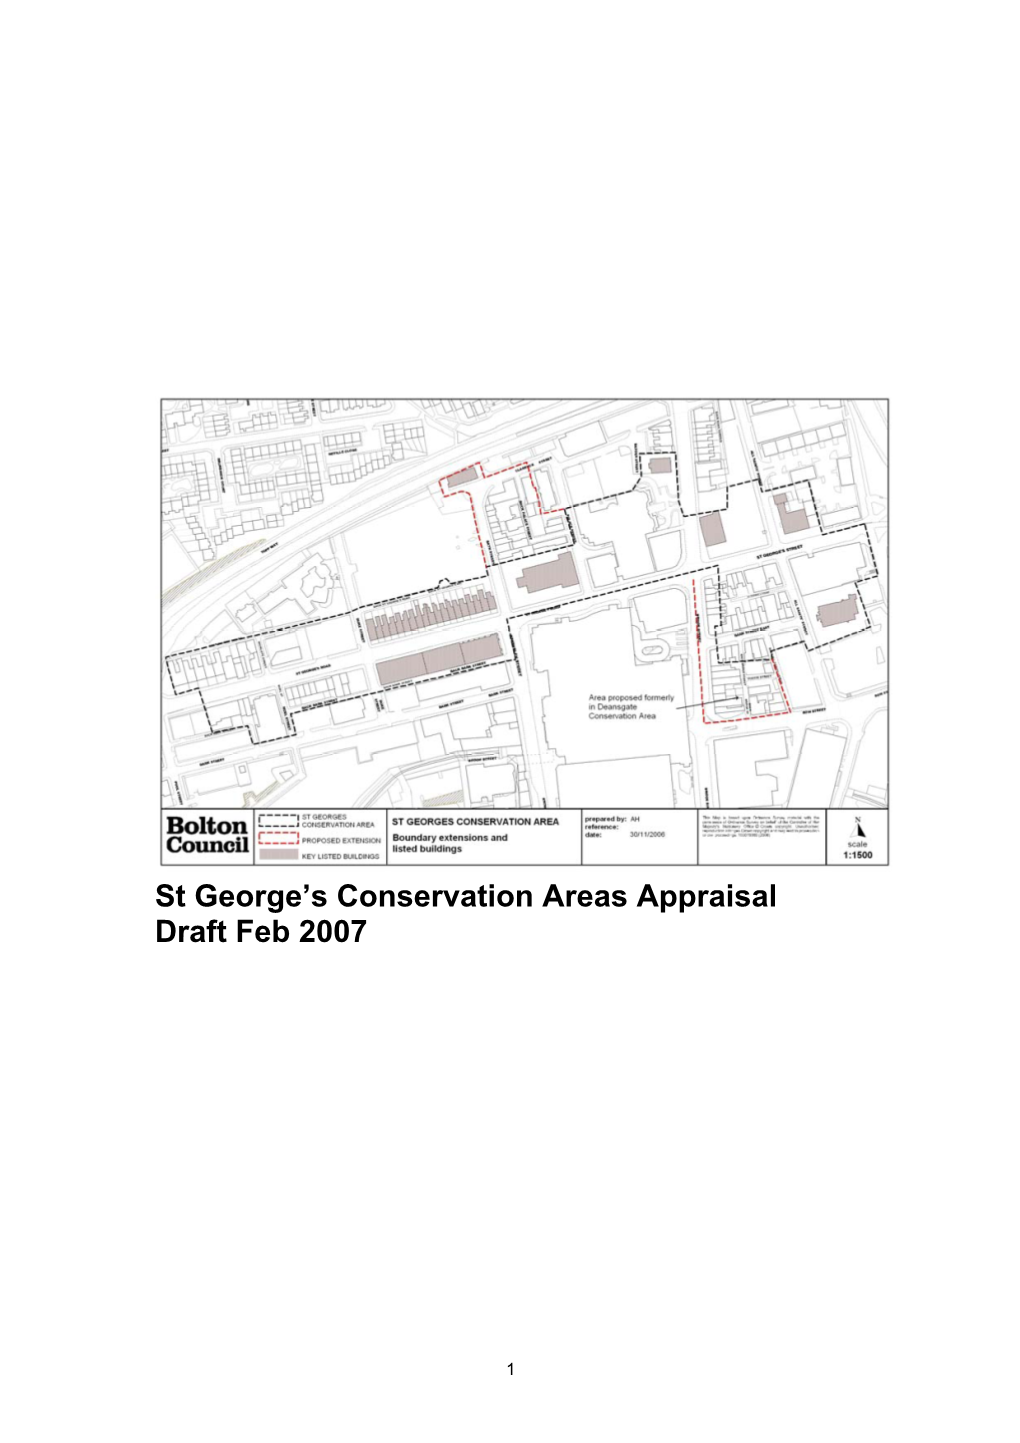 St. Georges Conservation Area Appraisal